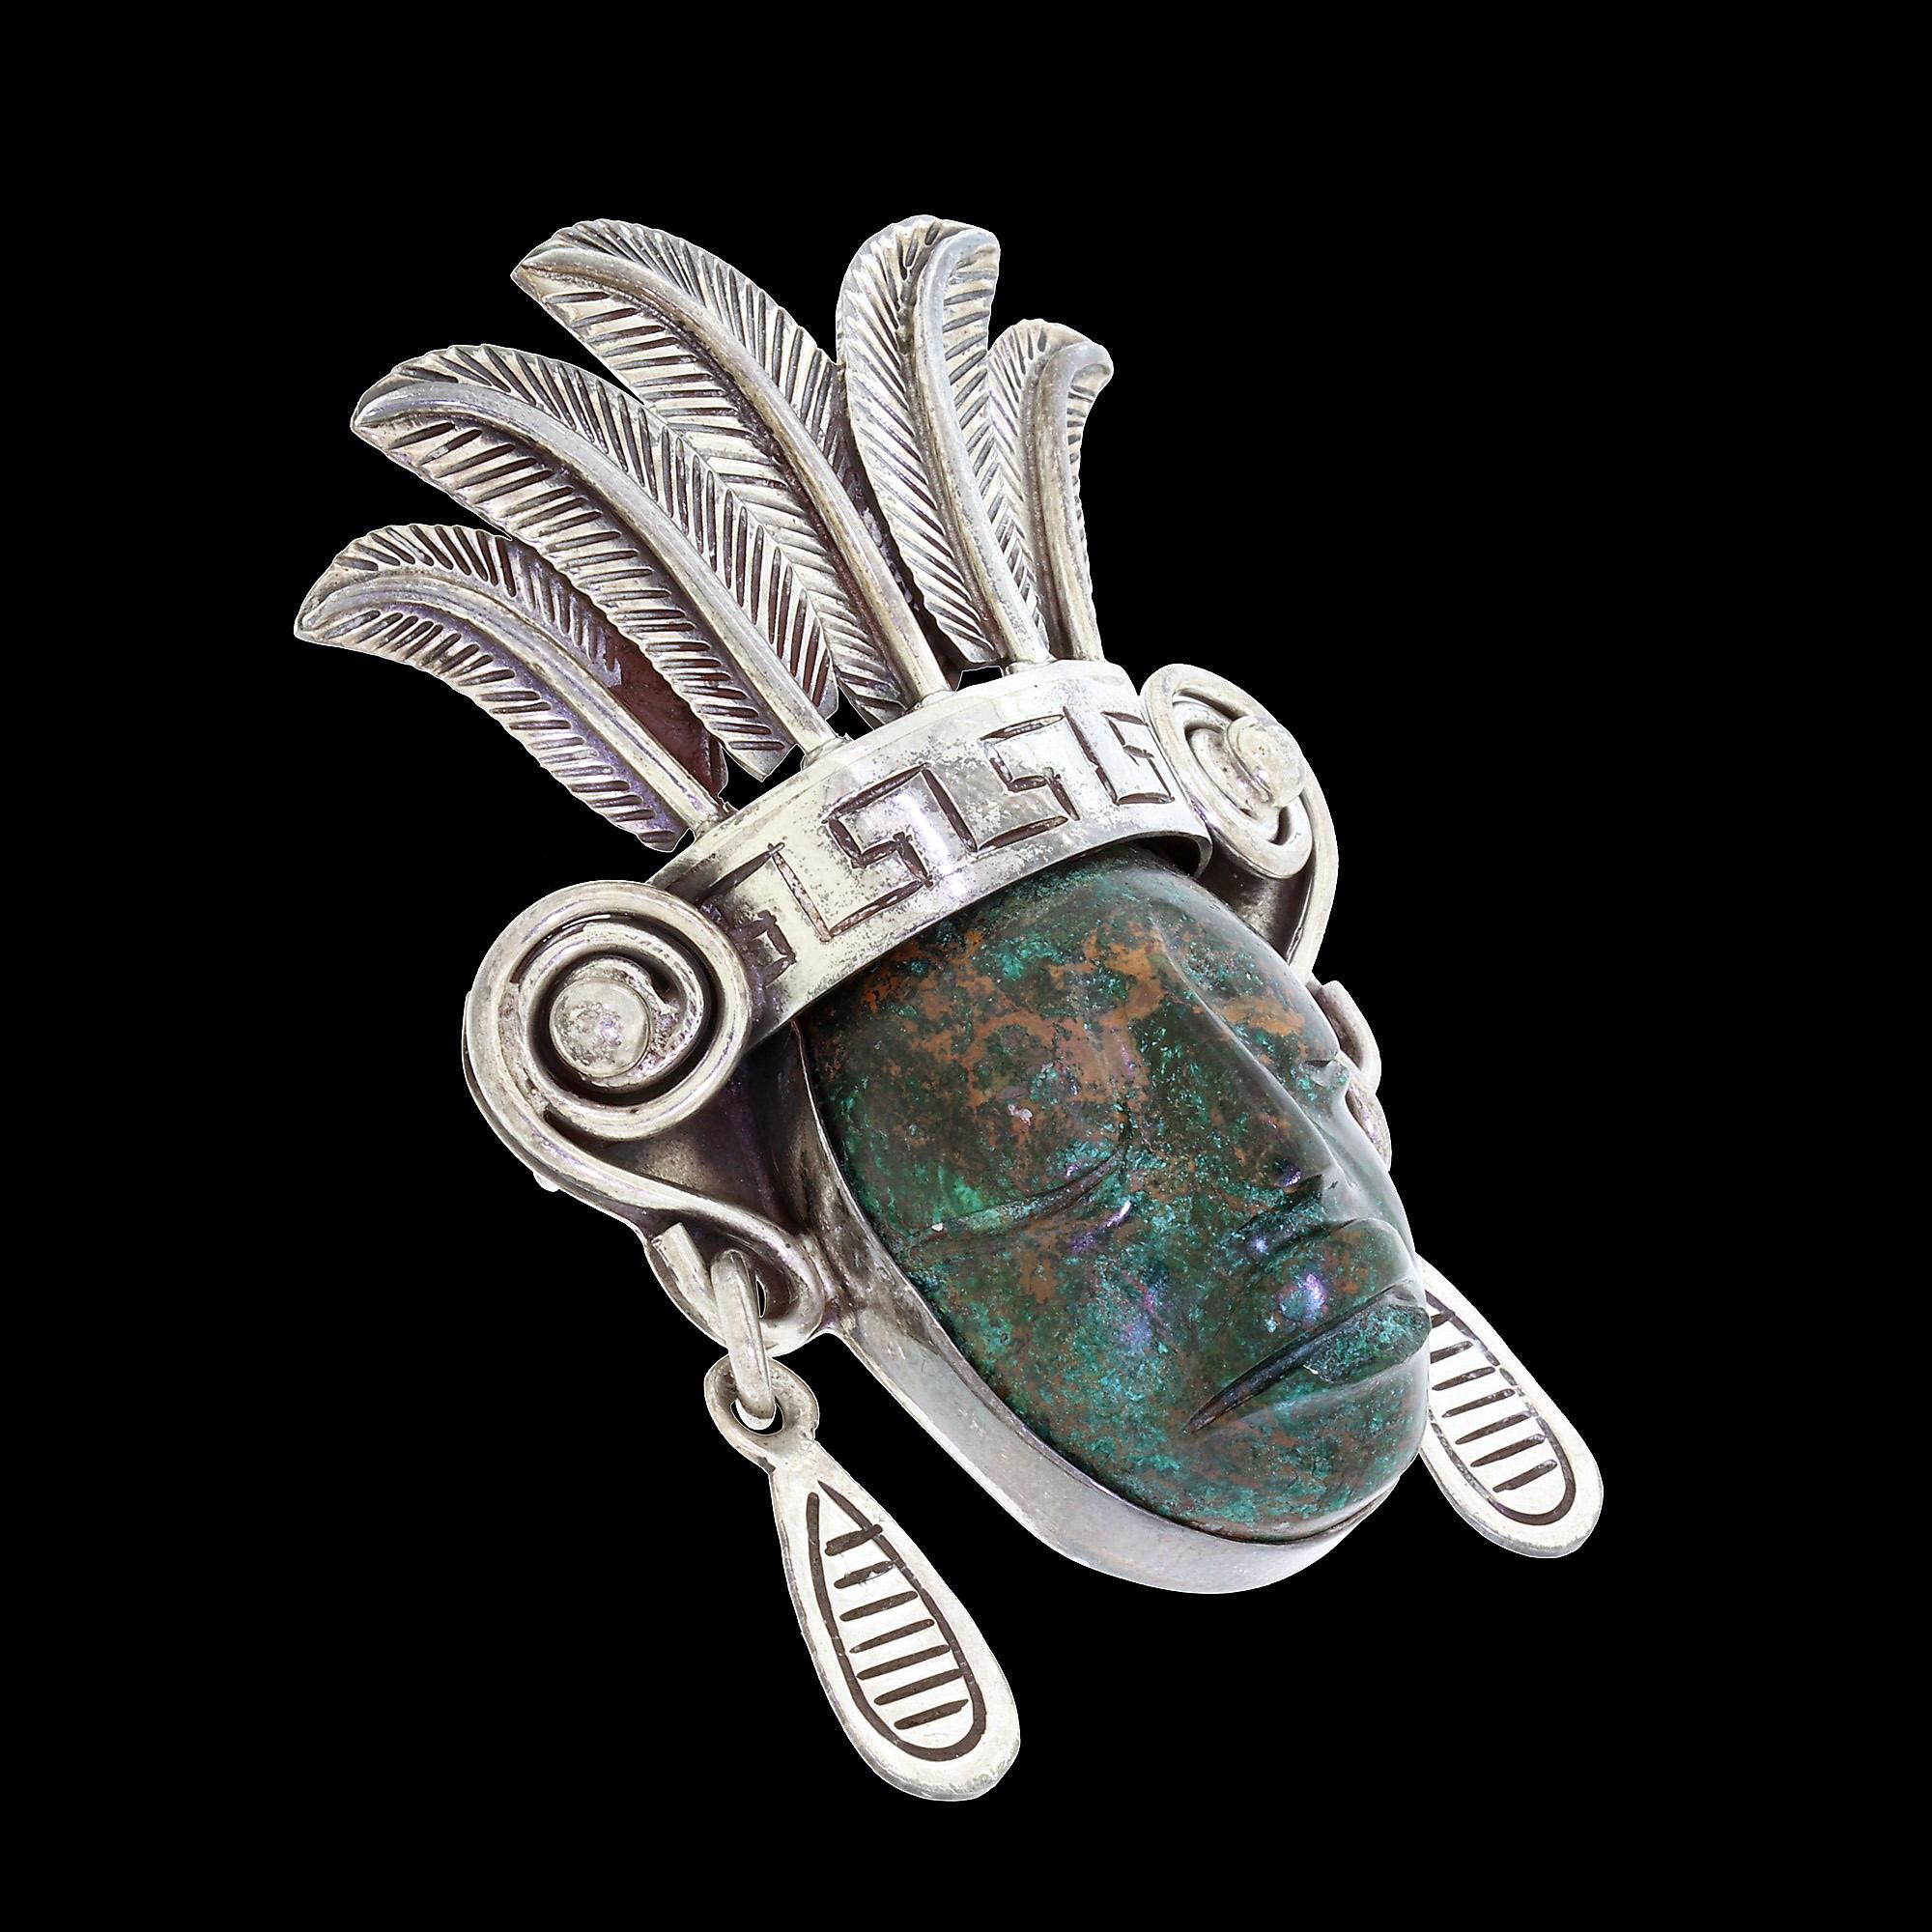 This is an early, rare, and important Los Ballesteros sterling silver and carved turquoise brooch of exceptional quality. 

The pin features an intricately designed motif of a Mayan face wearing a ceremonial feather headdress. The plumed headdress